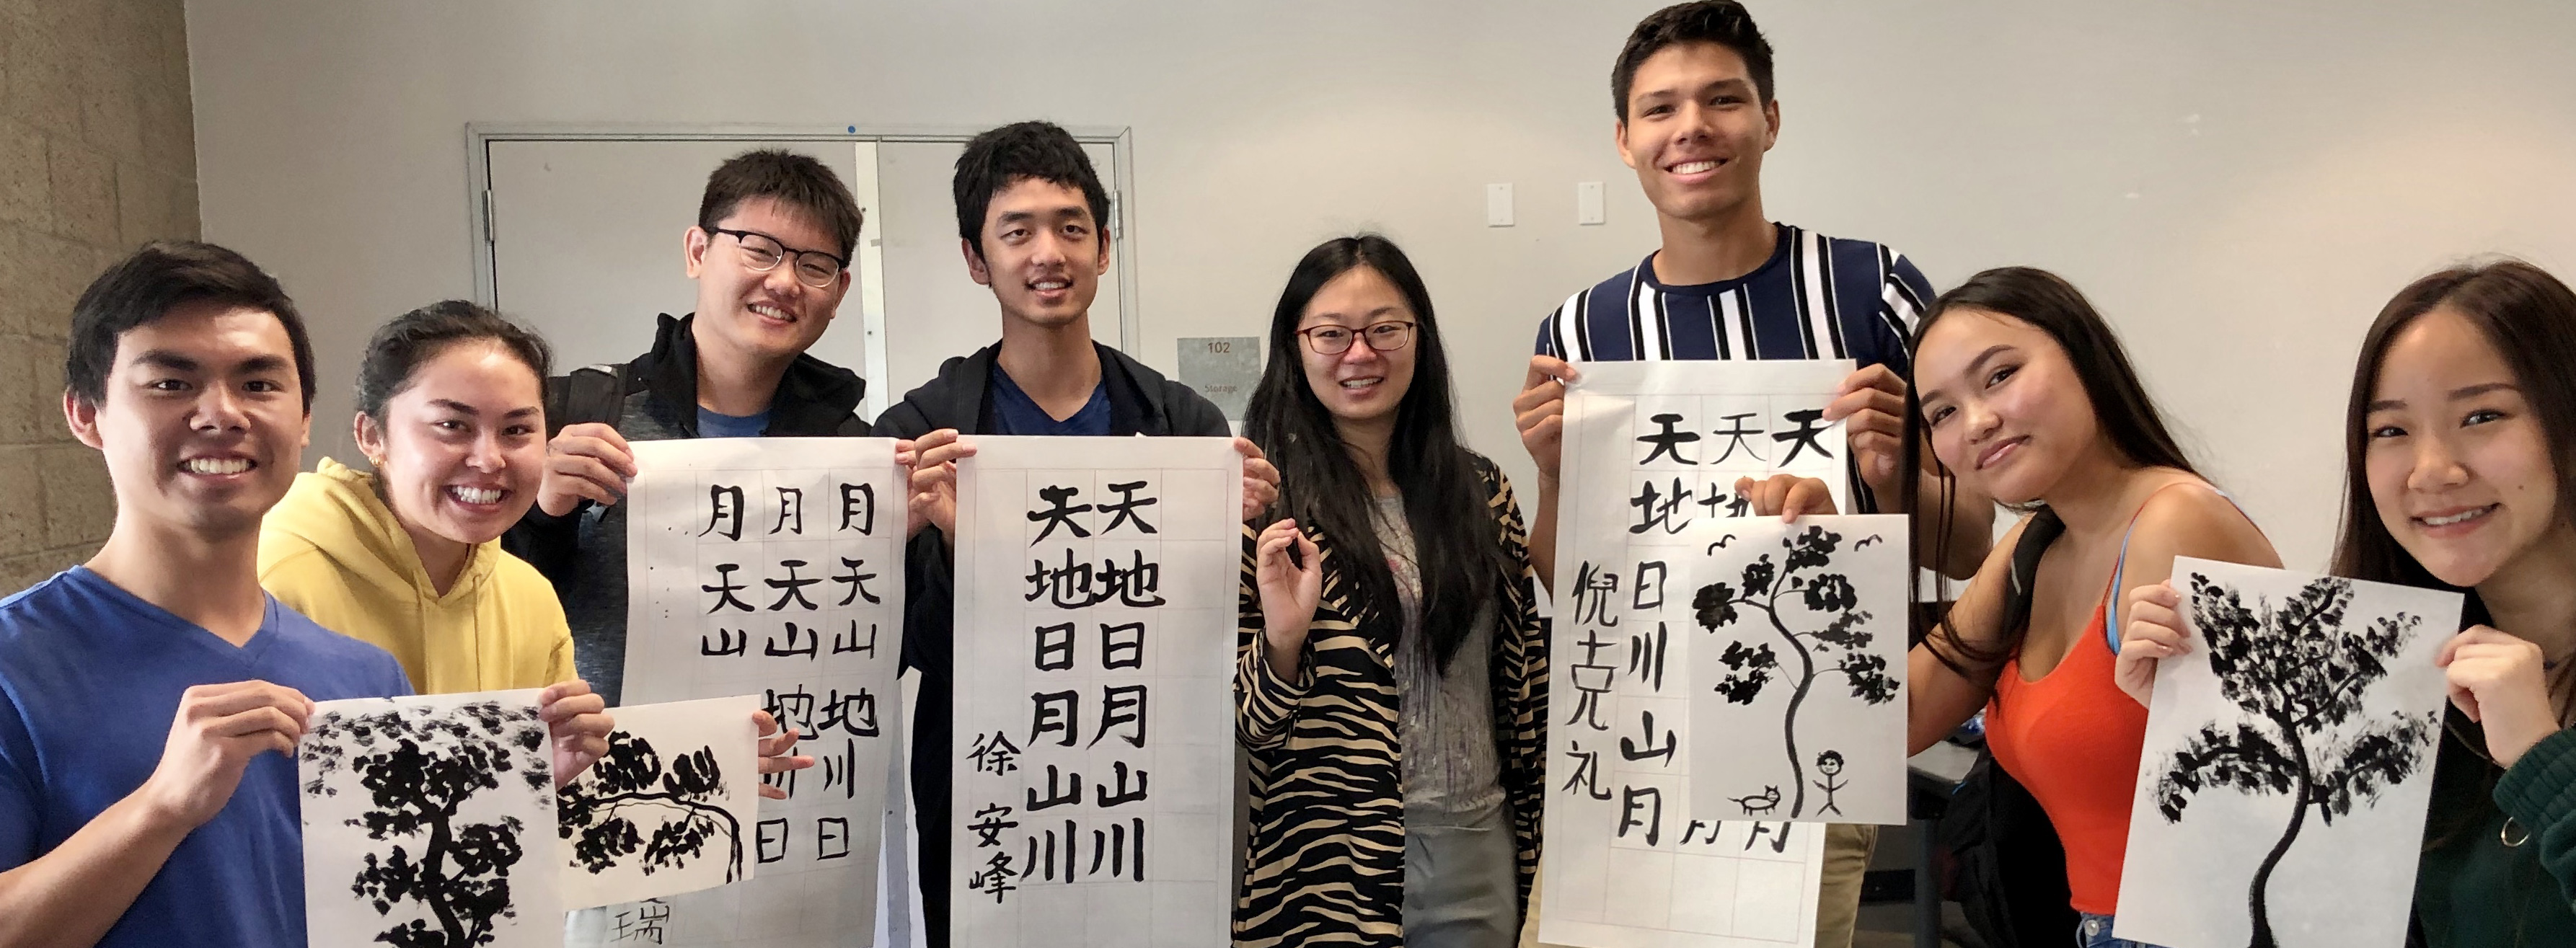 Chinese Studies Calligraphy Event